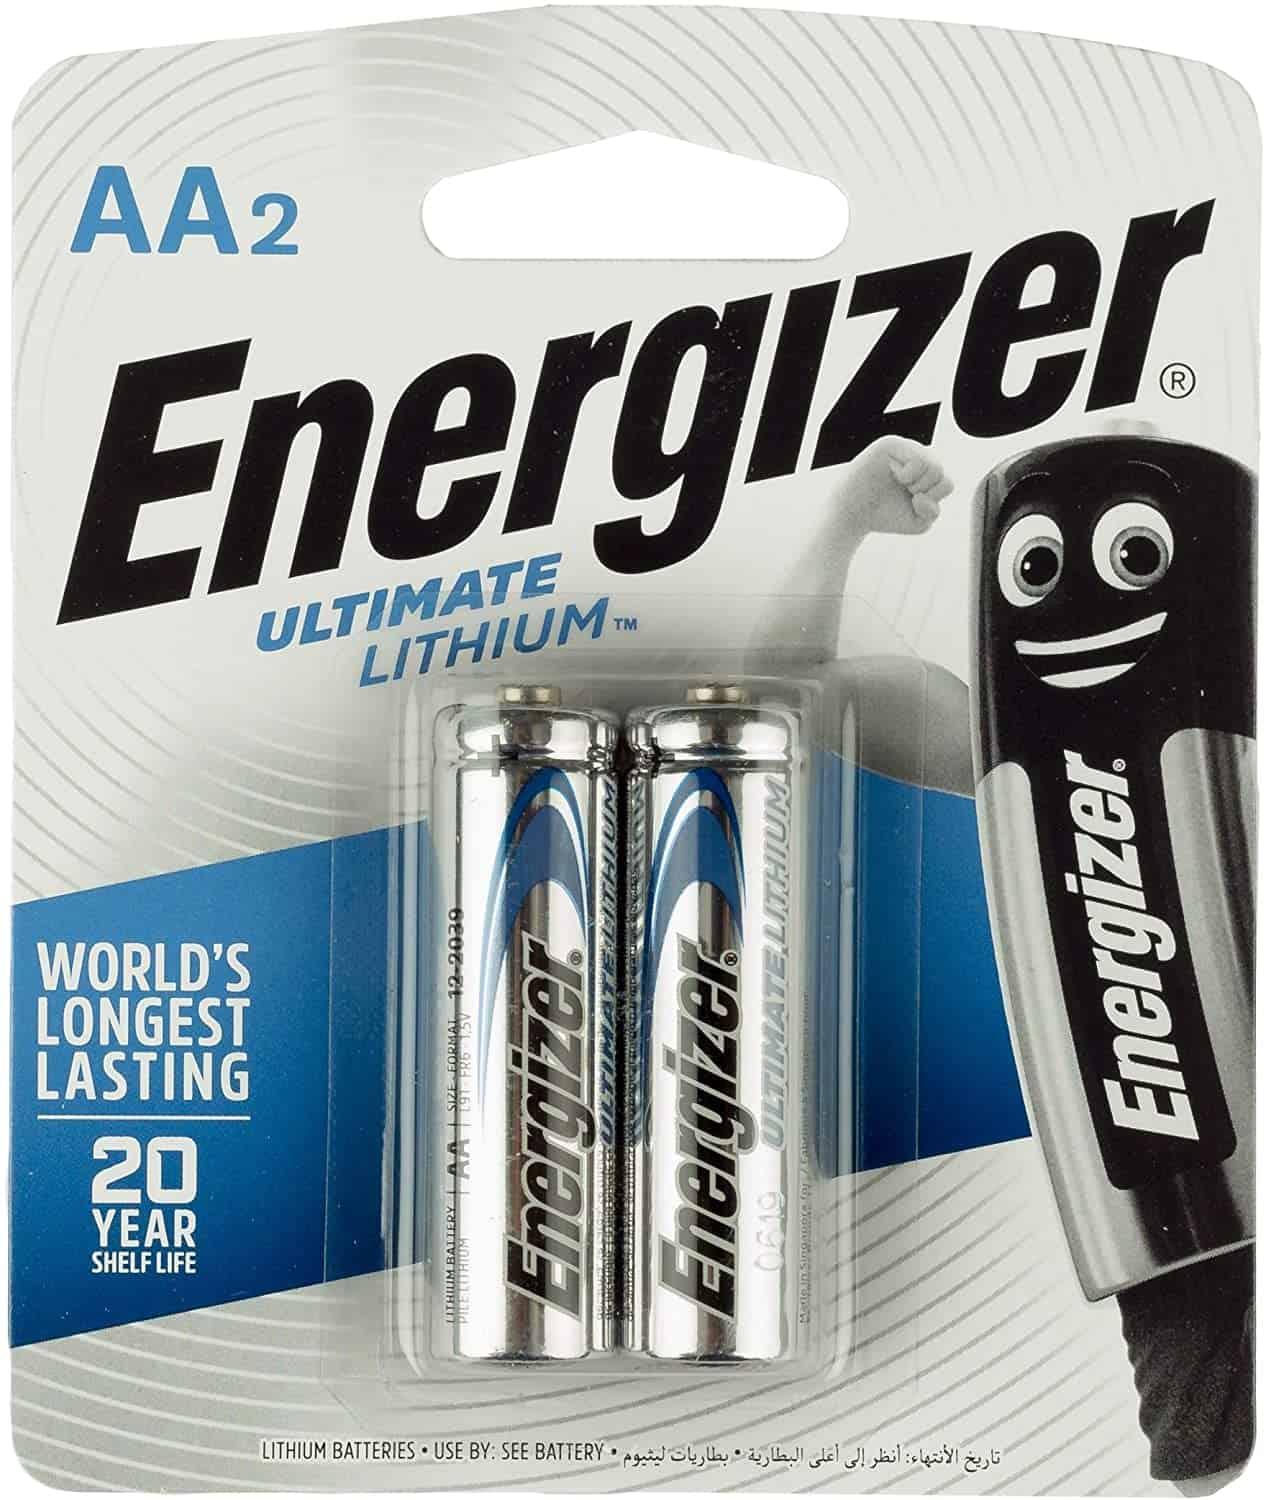 Energizer Ultimate Lithium 1.5V AA Batteries, 2 Pieces